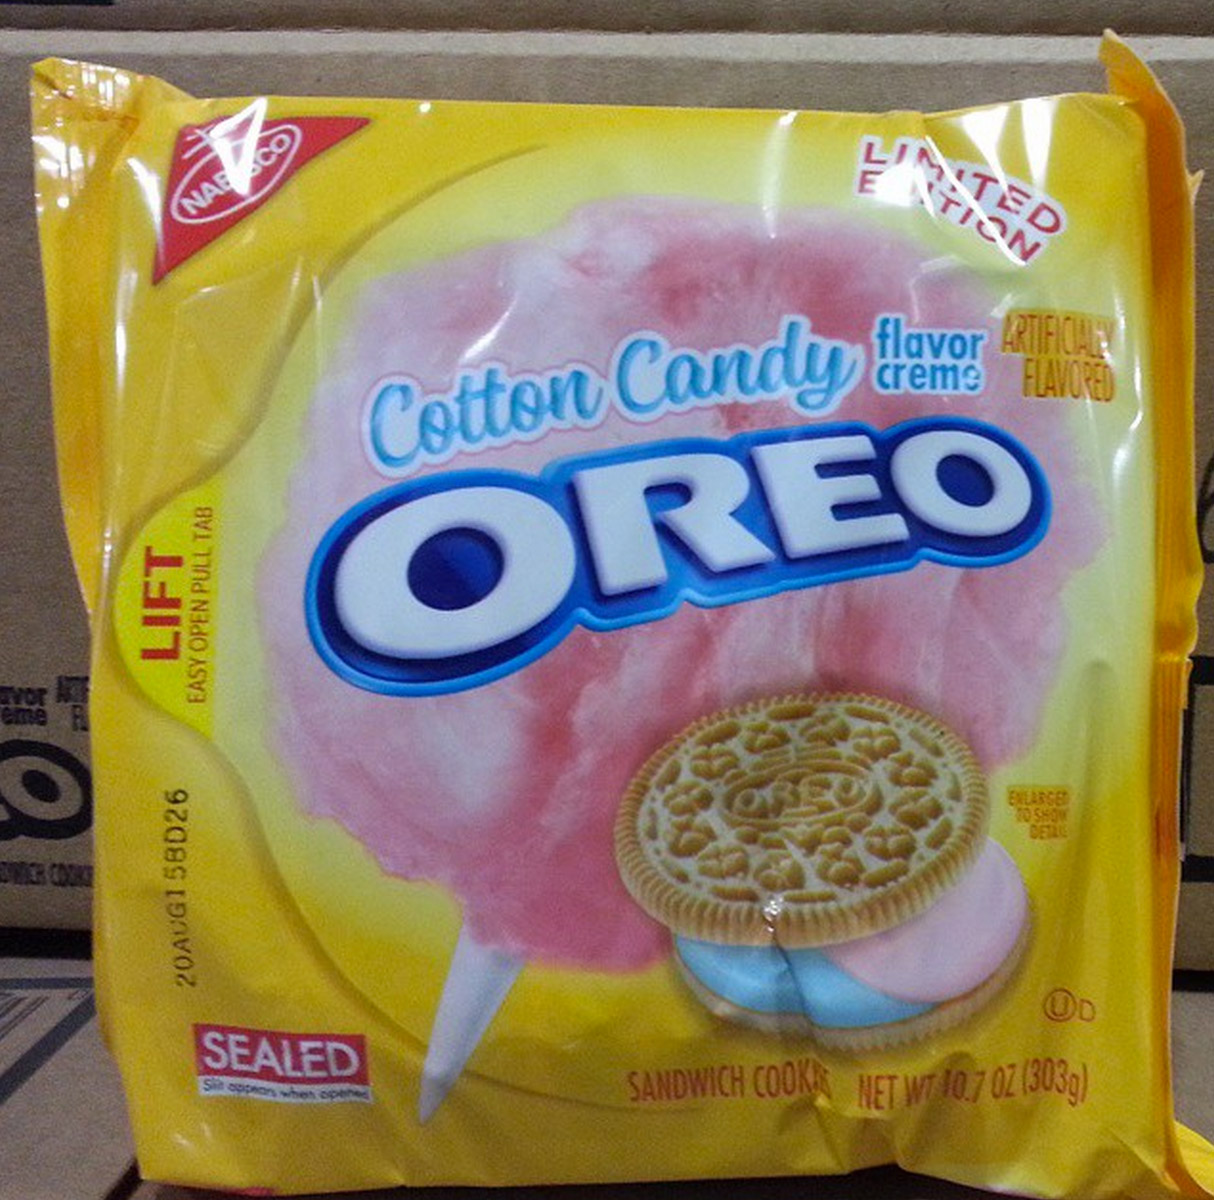 Nabisco Confirms Cotton Candy Oreos Are Real, Vows To Stop Cookie Leaks